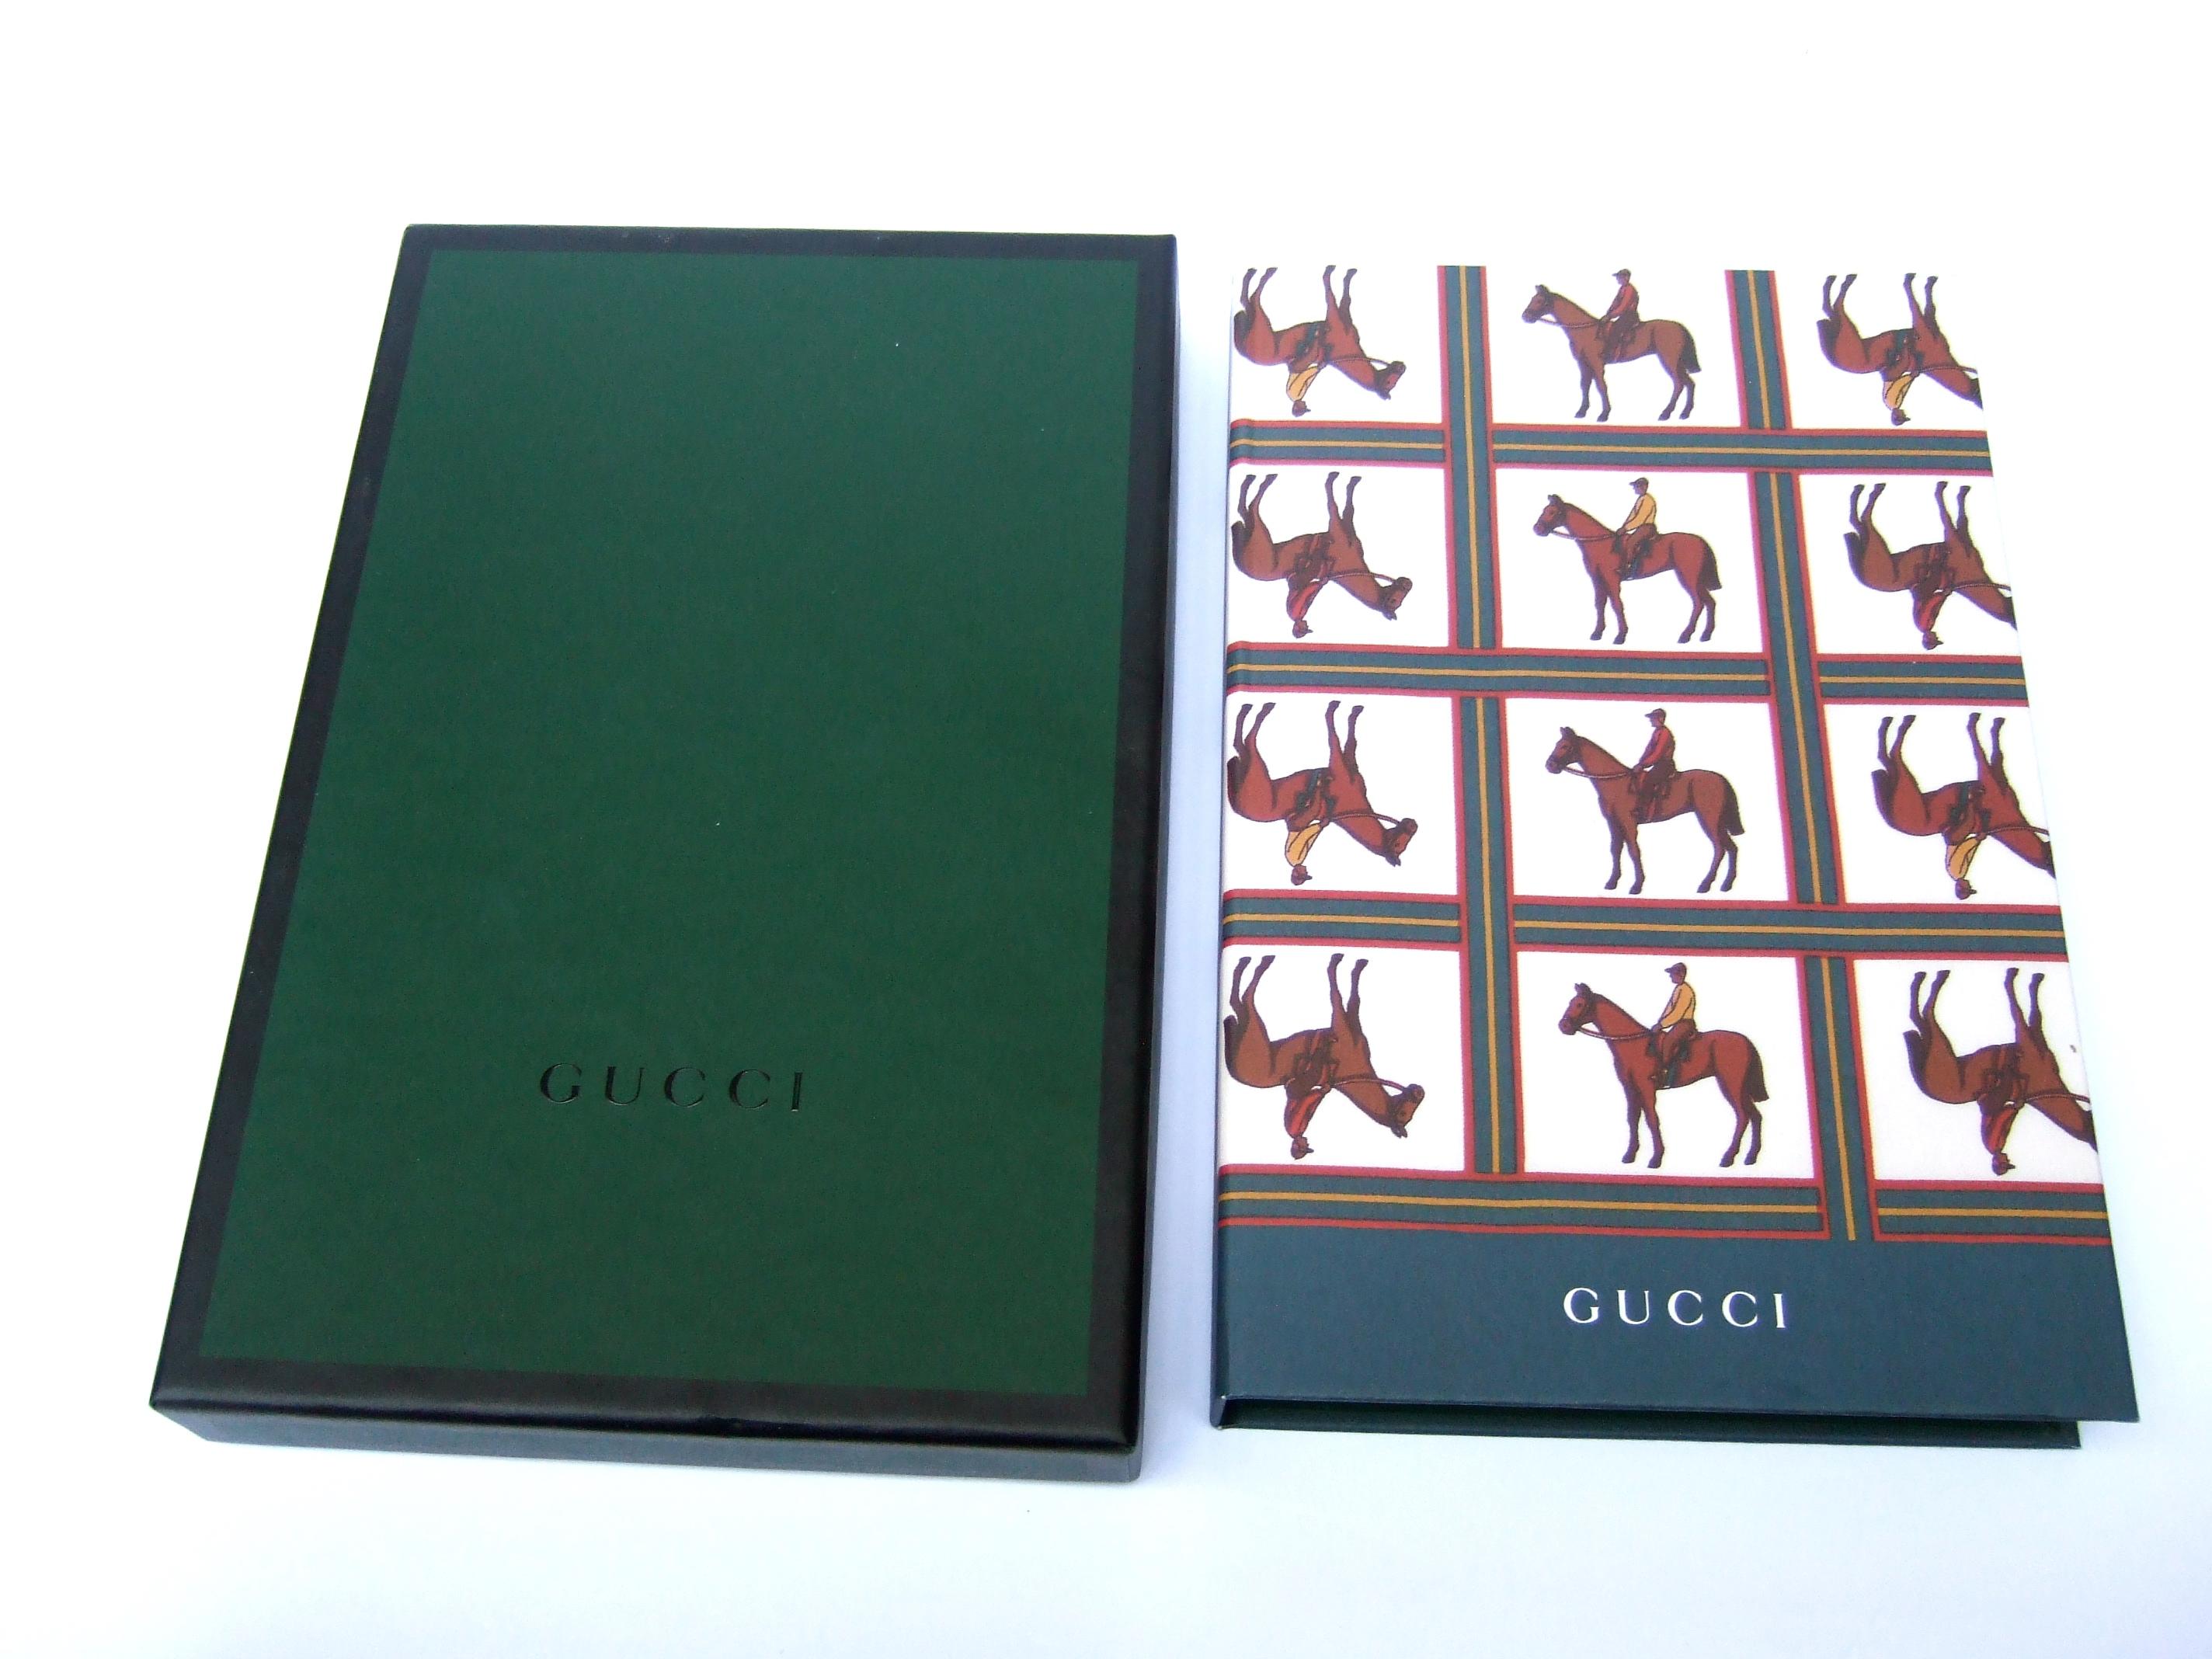 Gucci Equine Design Note Cards & Journal Book Stationery Set in Gucci Box c 1990 In Excellent Condition For Sale In University City, MO